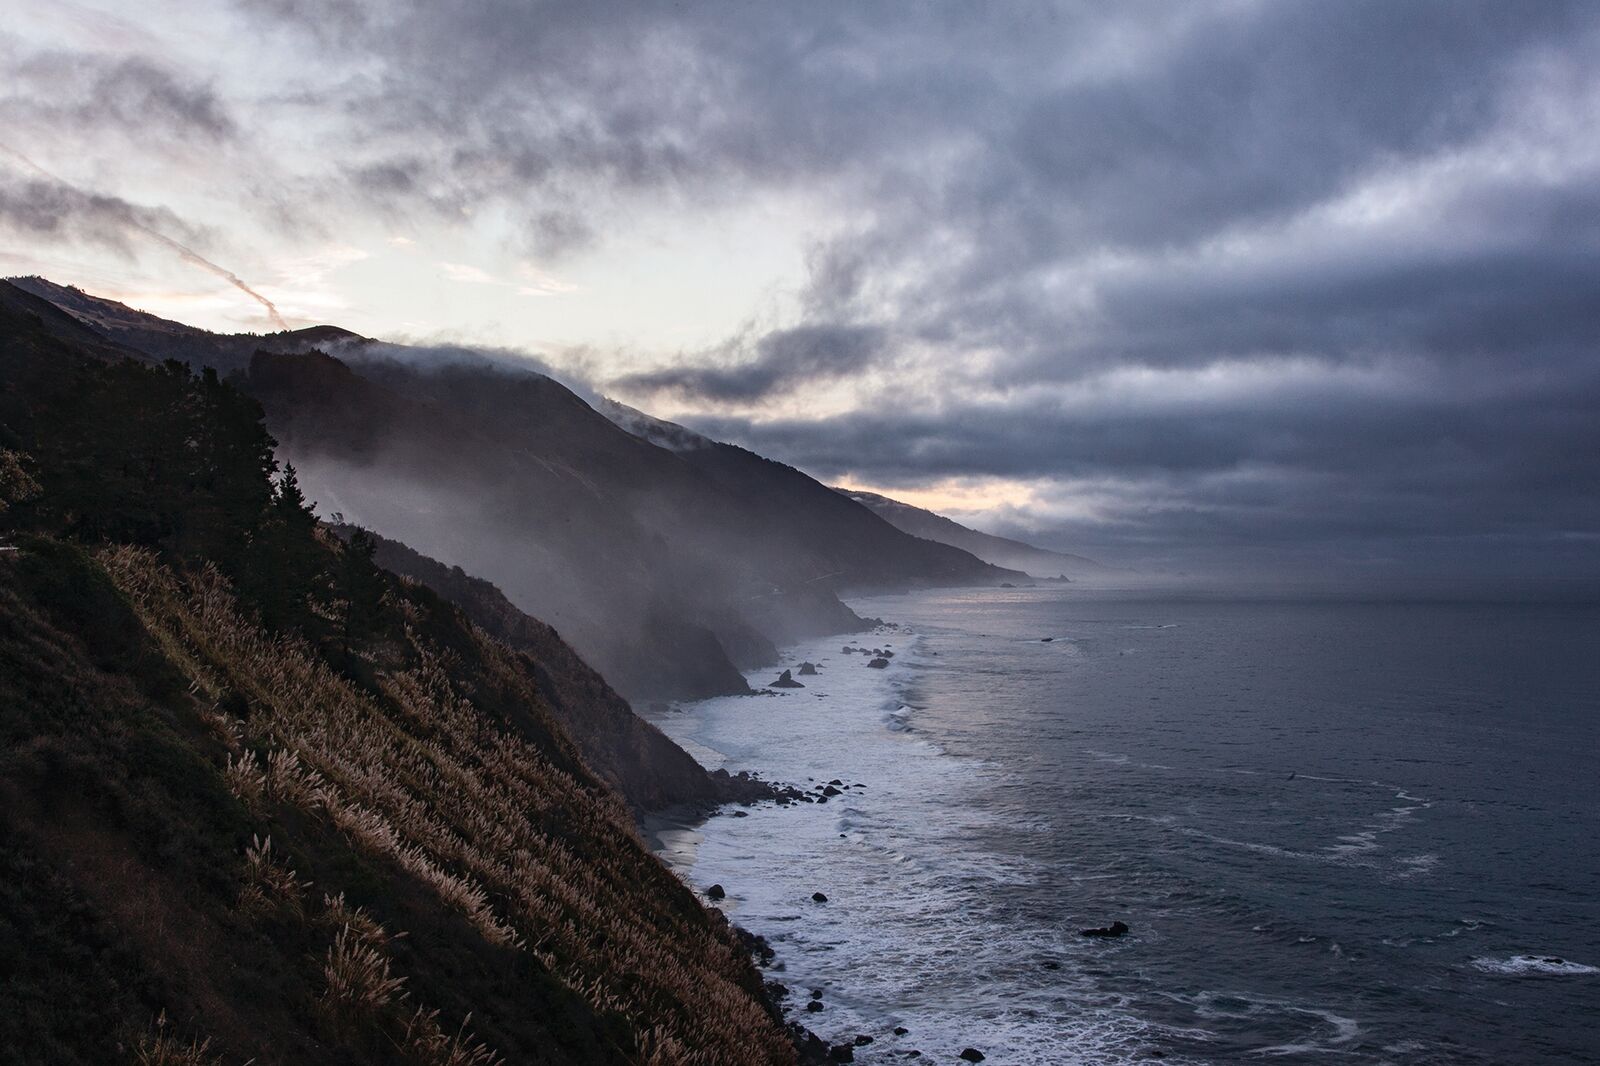 A cloudy sky over the coastline of Big Sur in California